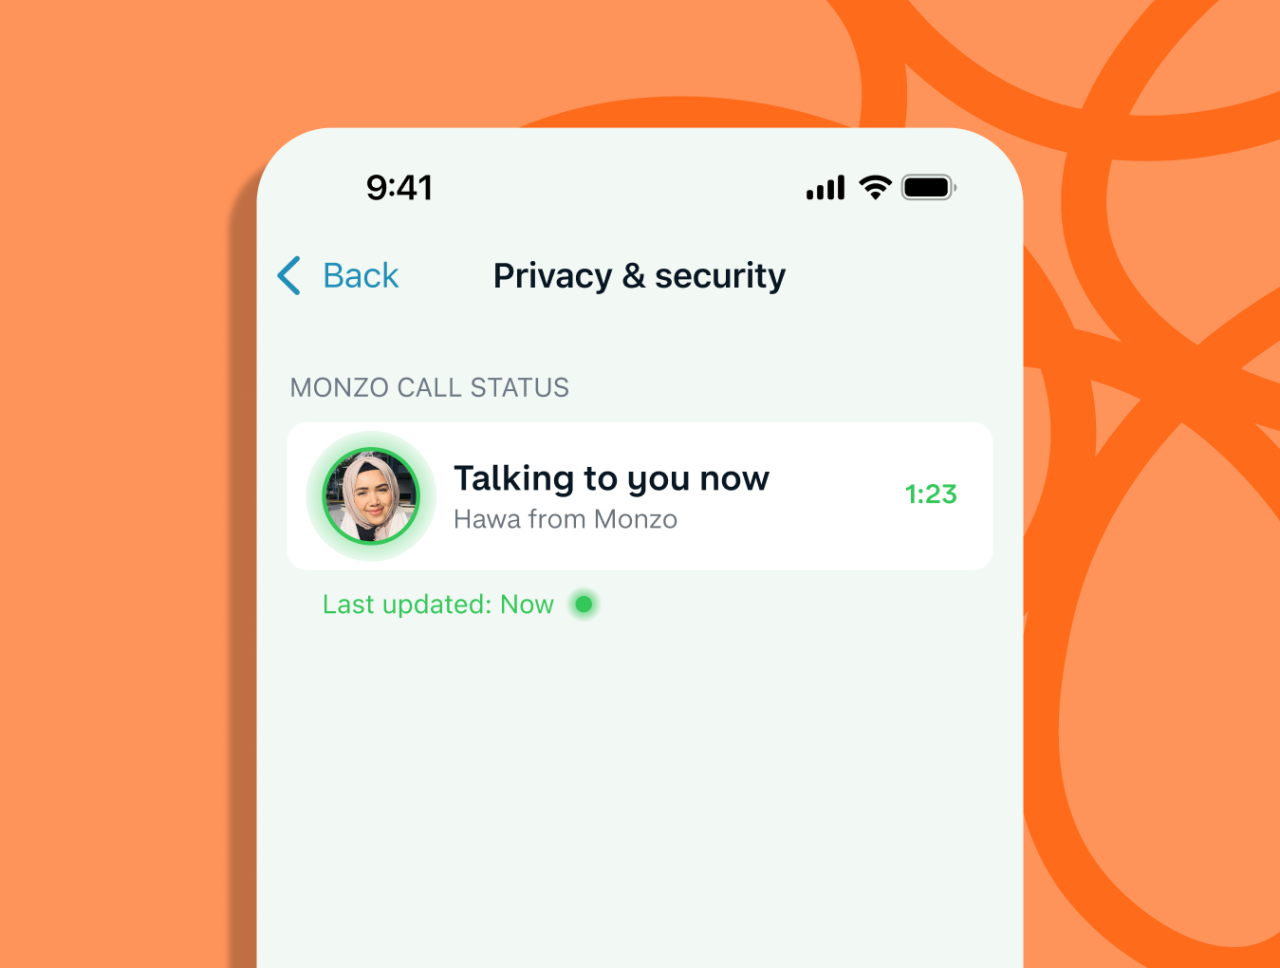 A screenshot of the Privacy and Security screen in the Monzo app showing the Monzo Call Status. An image of a Monzo customer service agent is showing, with a message that says "Talking to you now - Hawa from Monzo"